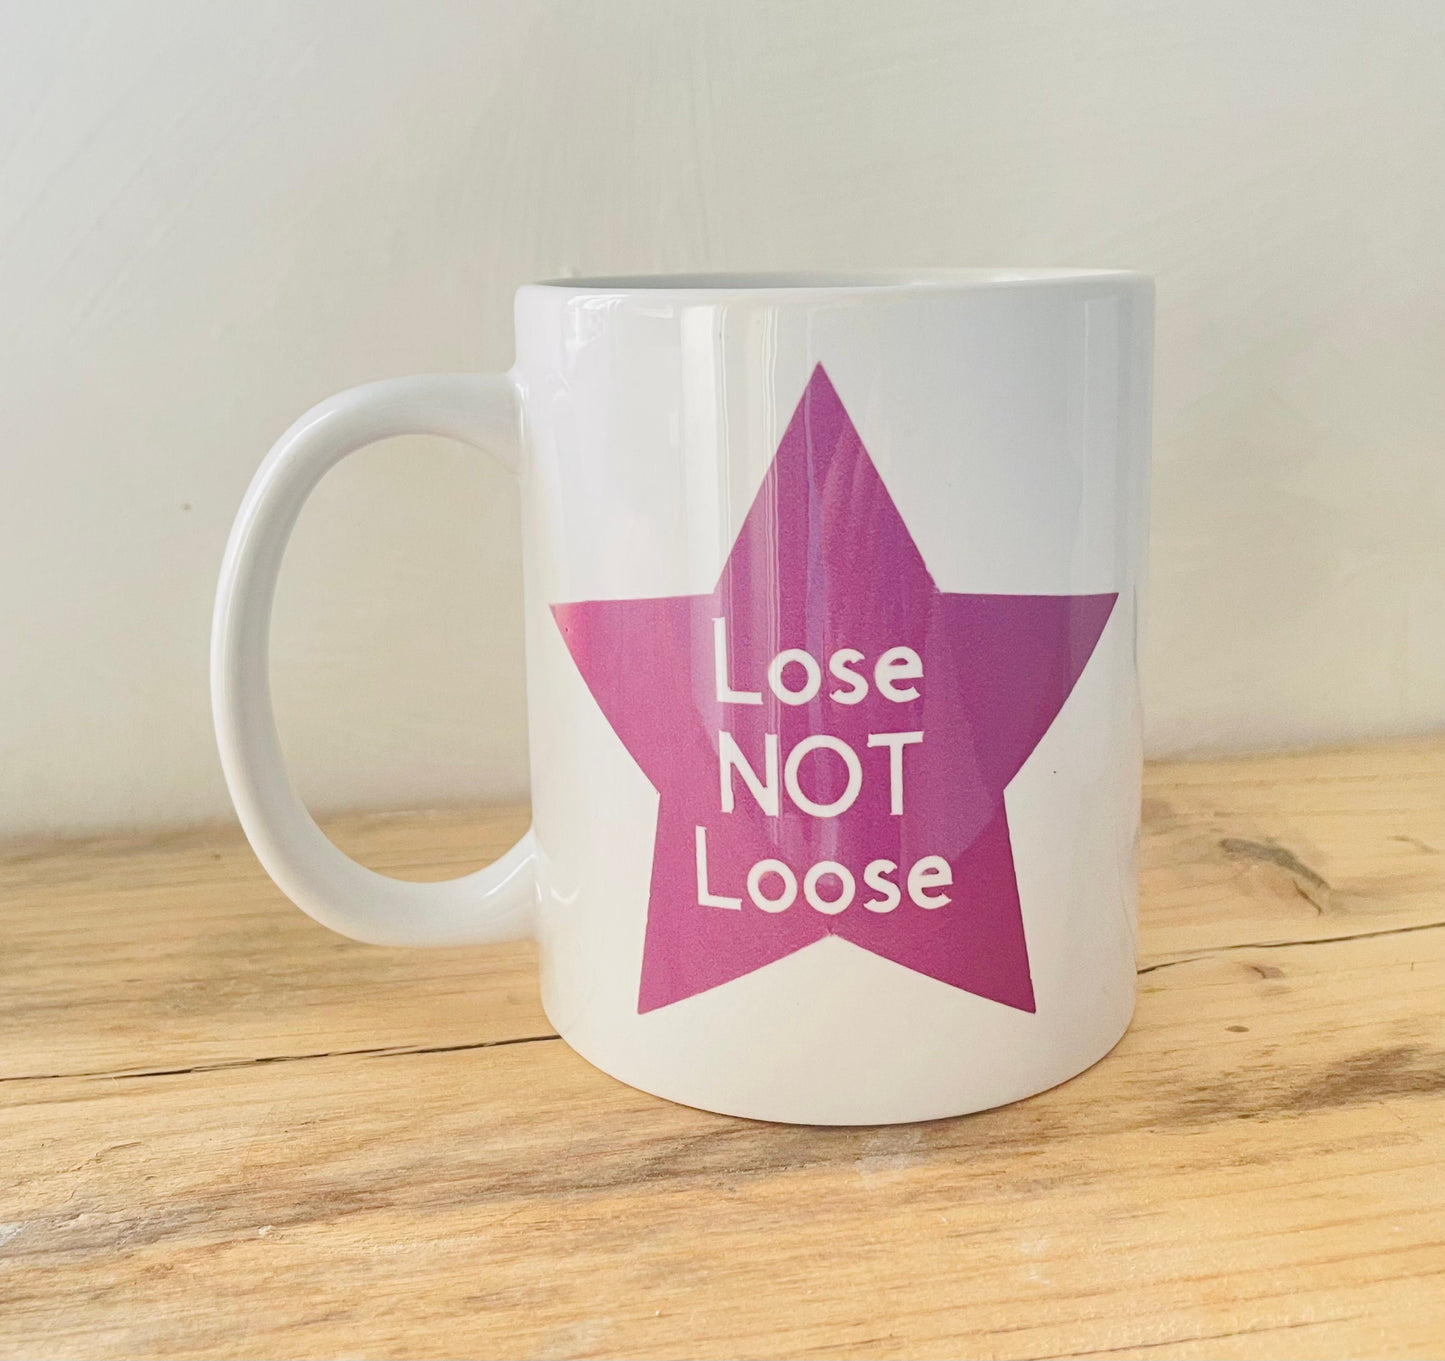 Spelling and Grammar Mug Gifts for Teacher Aitch not Haitch English Language Lover’s Mug Lose not Loose Correct Spelling Coffee Cup Mug Gift